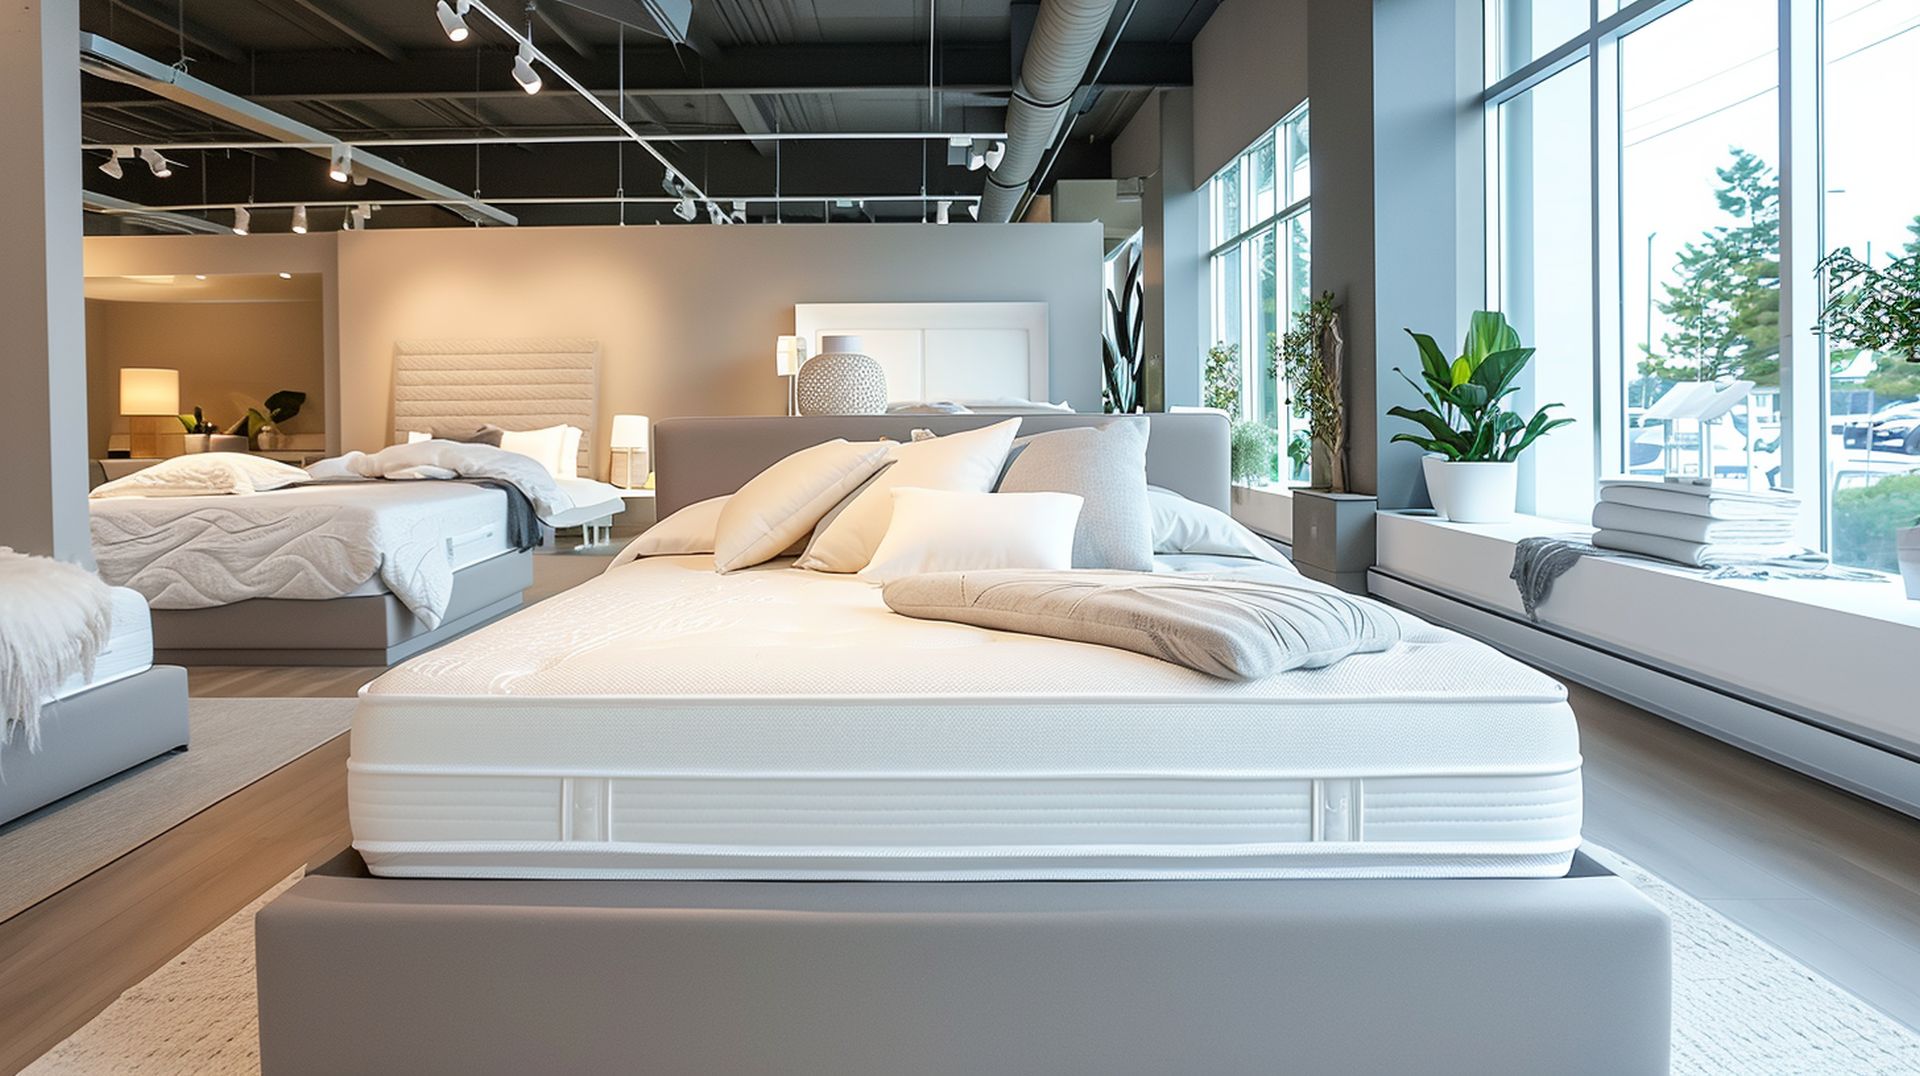 Local Huntsville mattress stores have the best prices, sales, and deals if you're looking for a new mattress in Huntsville